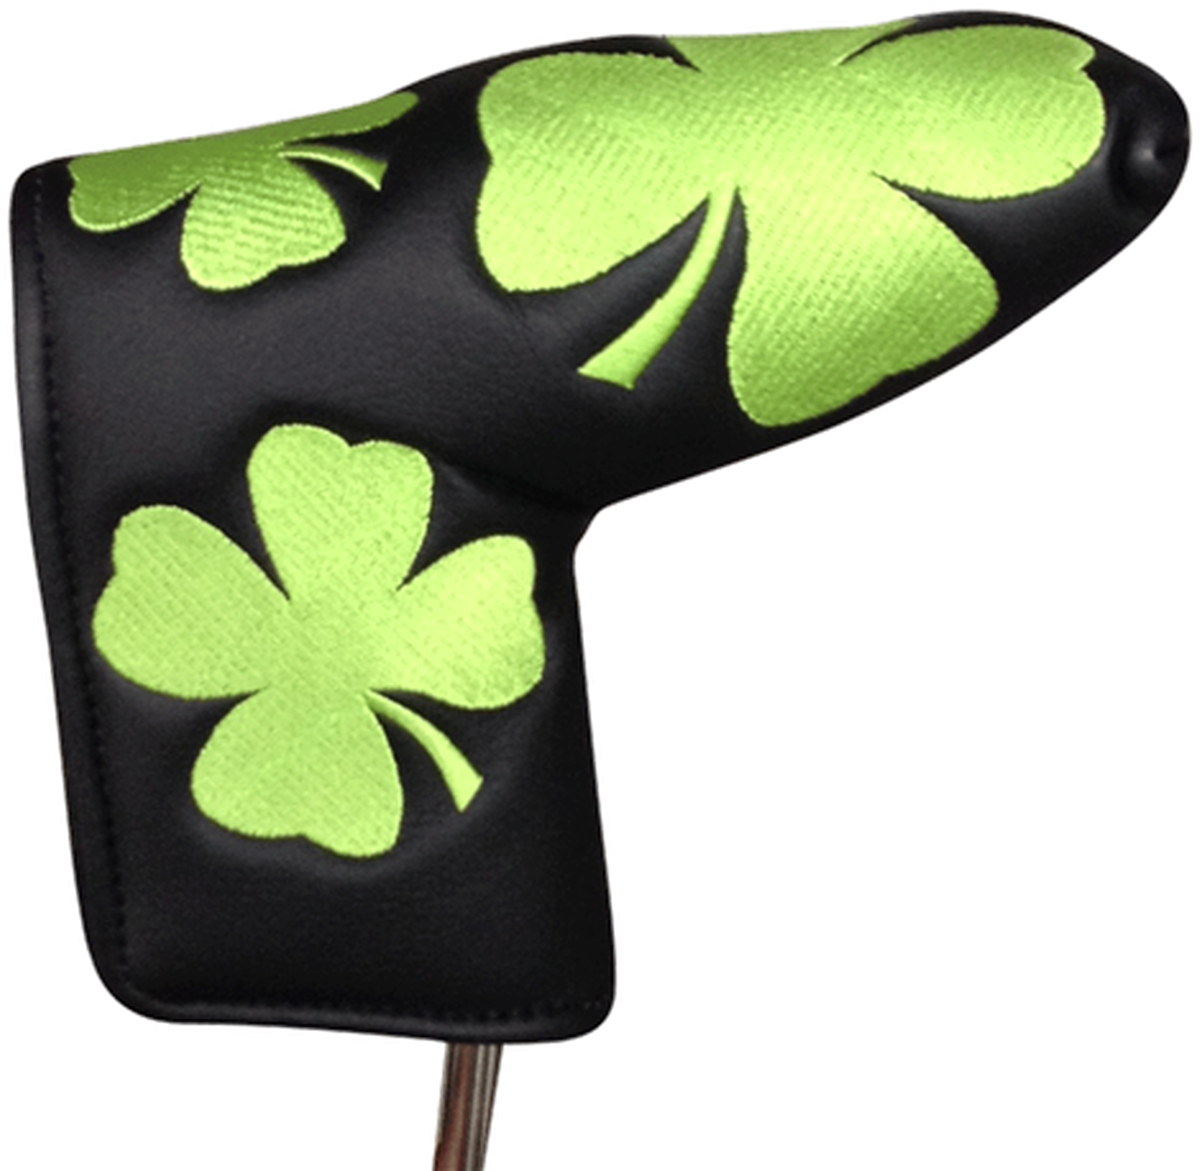 A Black And Green Golf Club Putter With Clovers